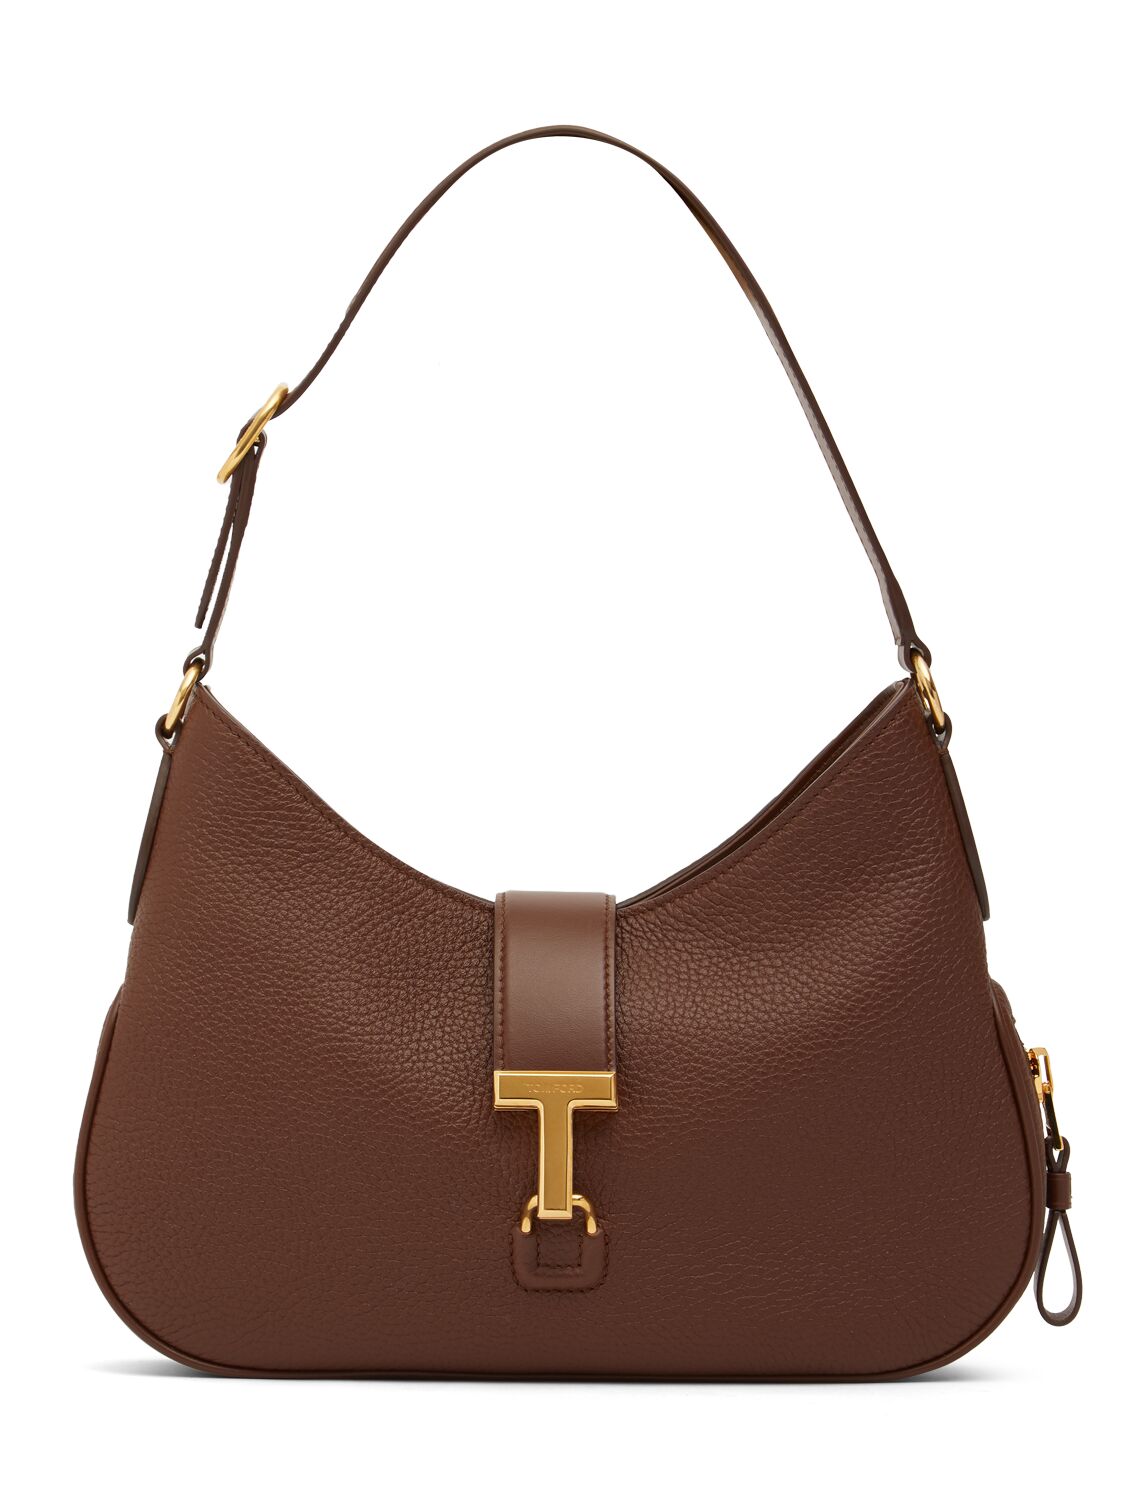 Tom Ford Medium Monarch Grain Leather Bag In Saddle Brown